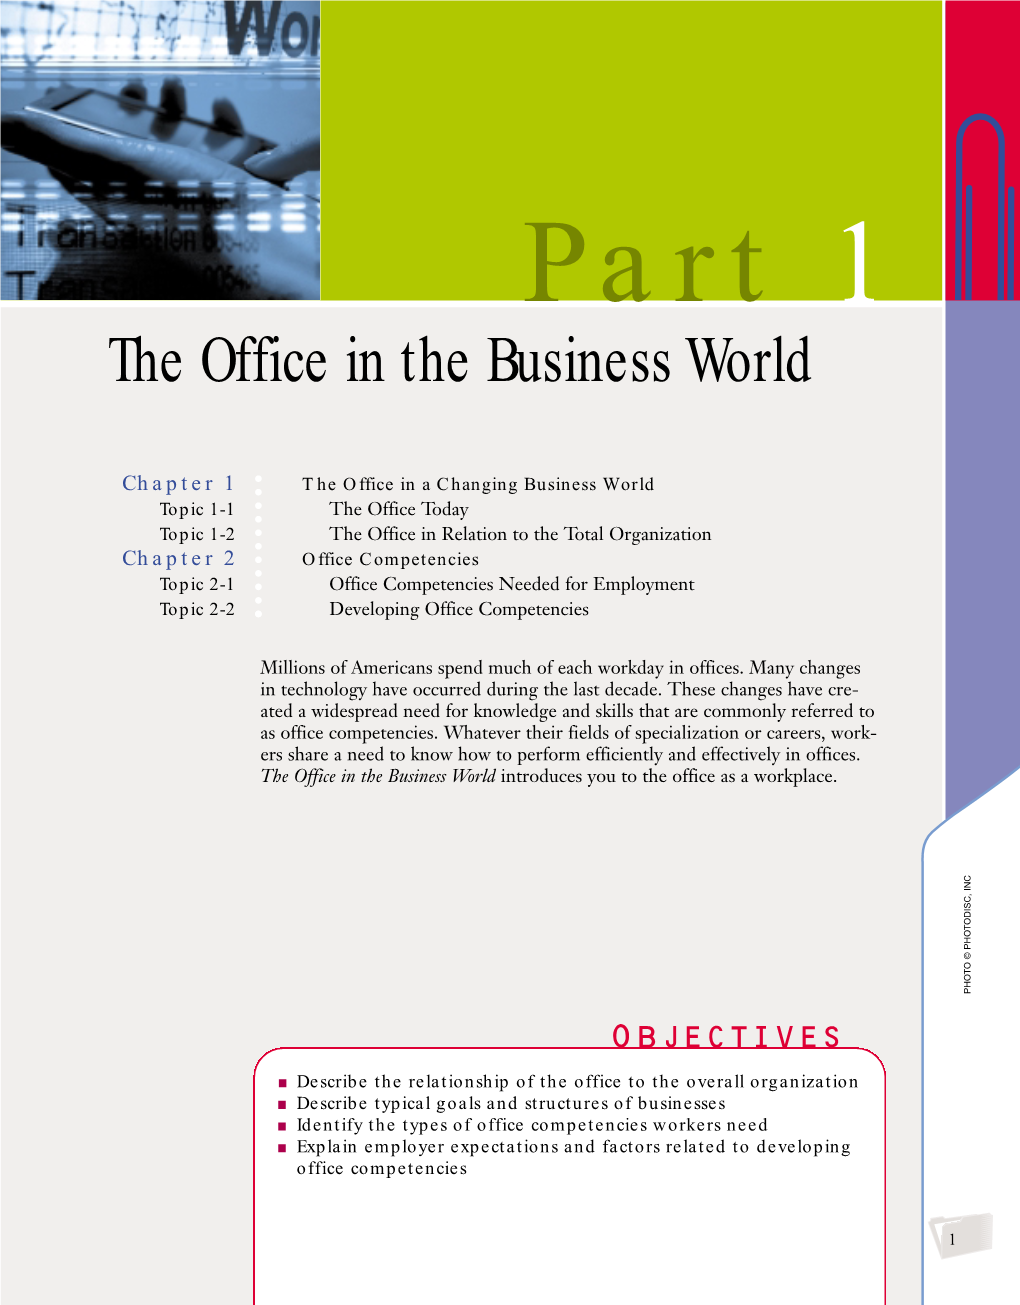 The Office in the Business World